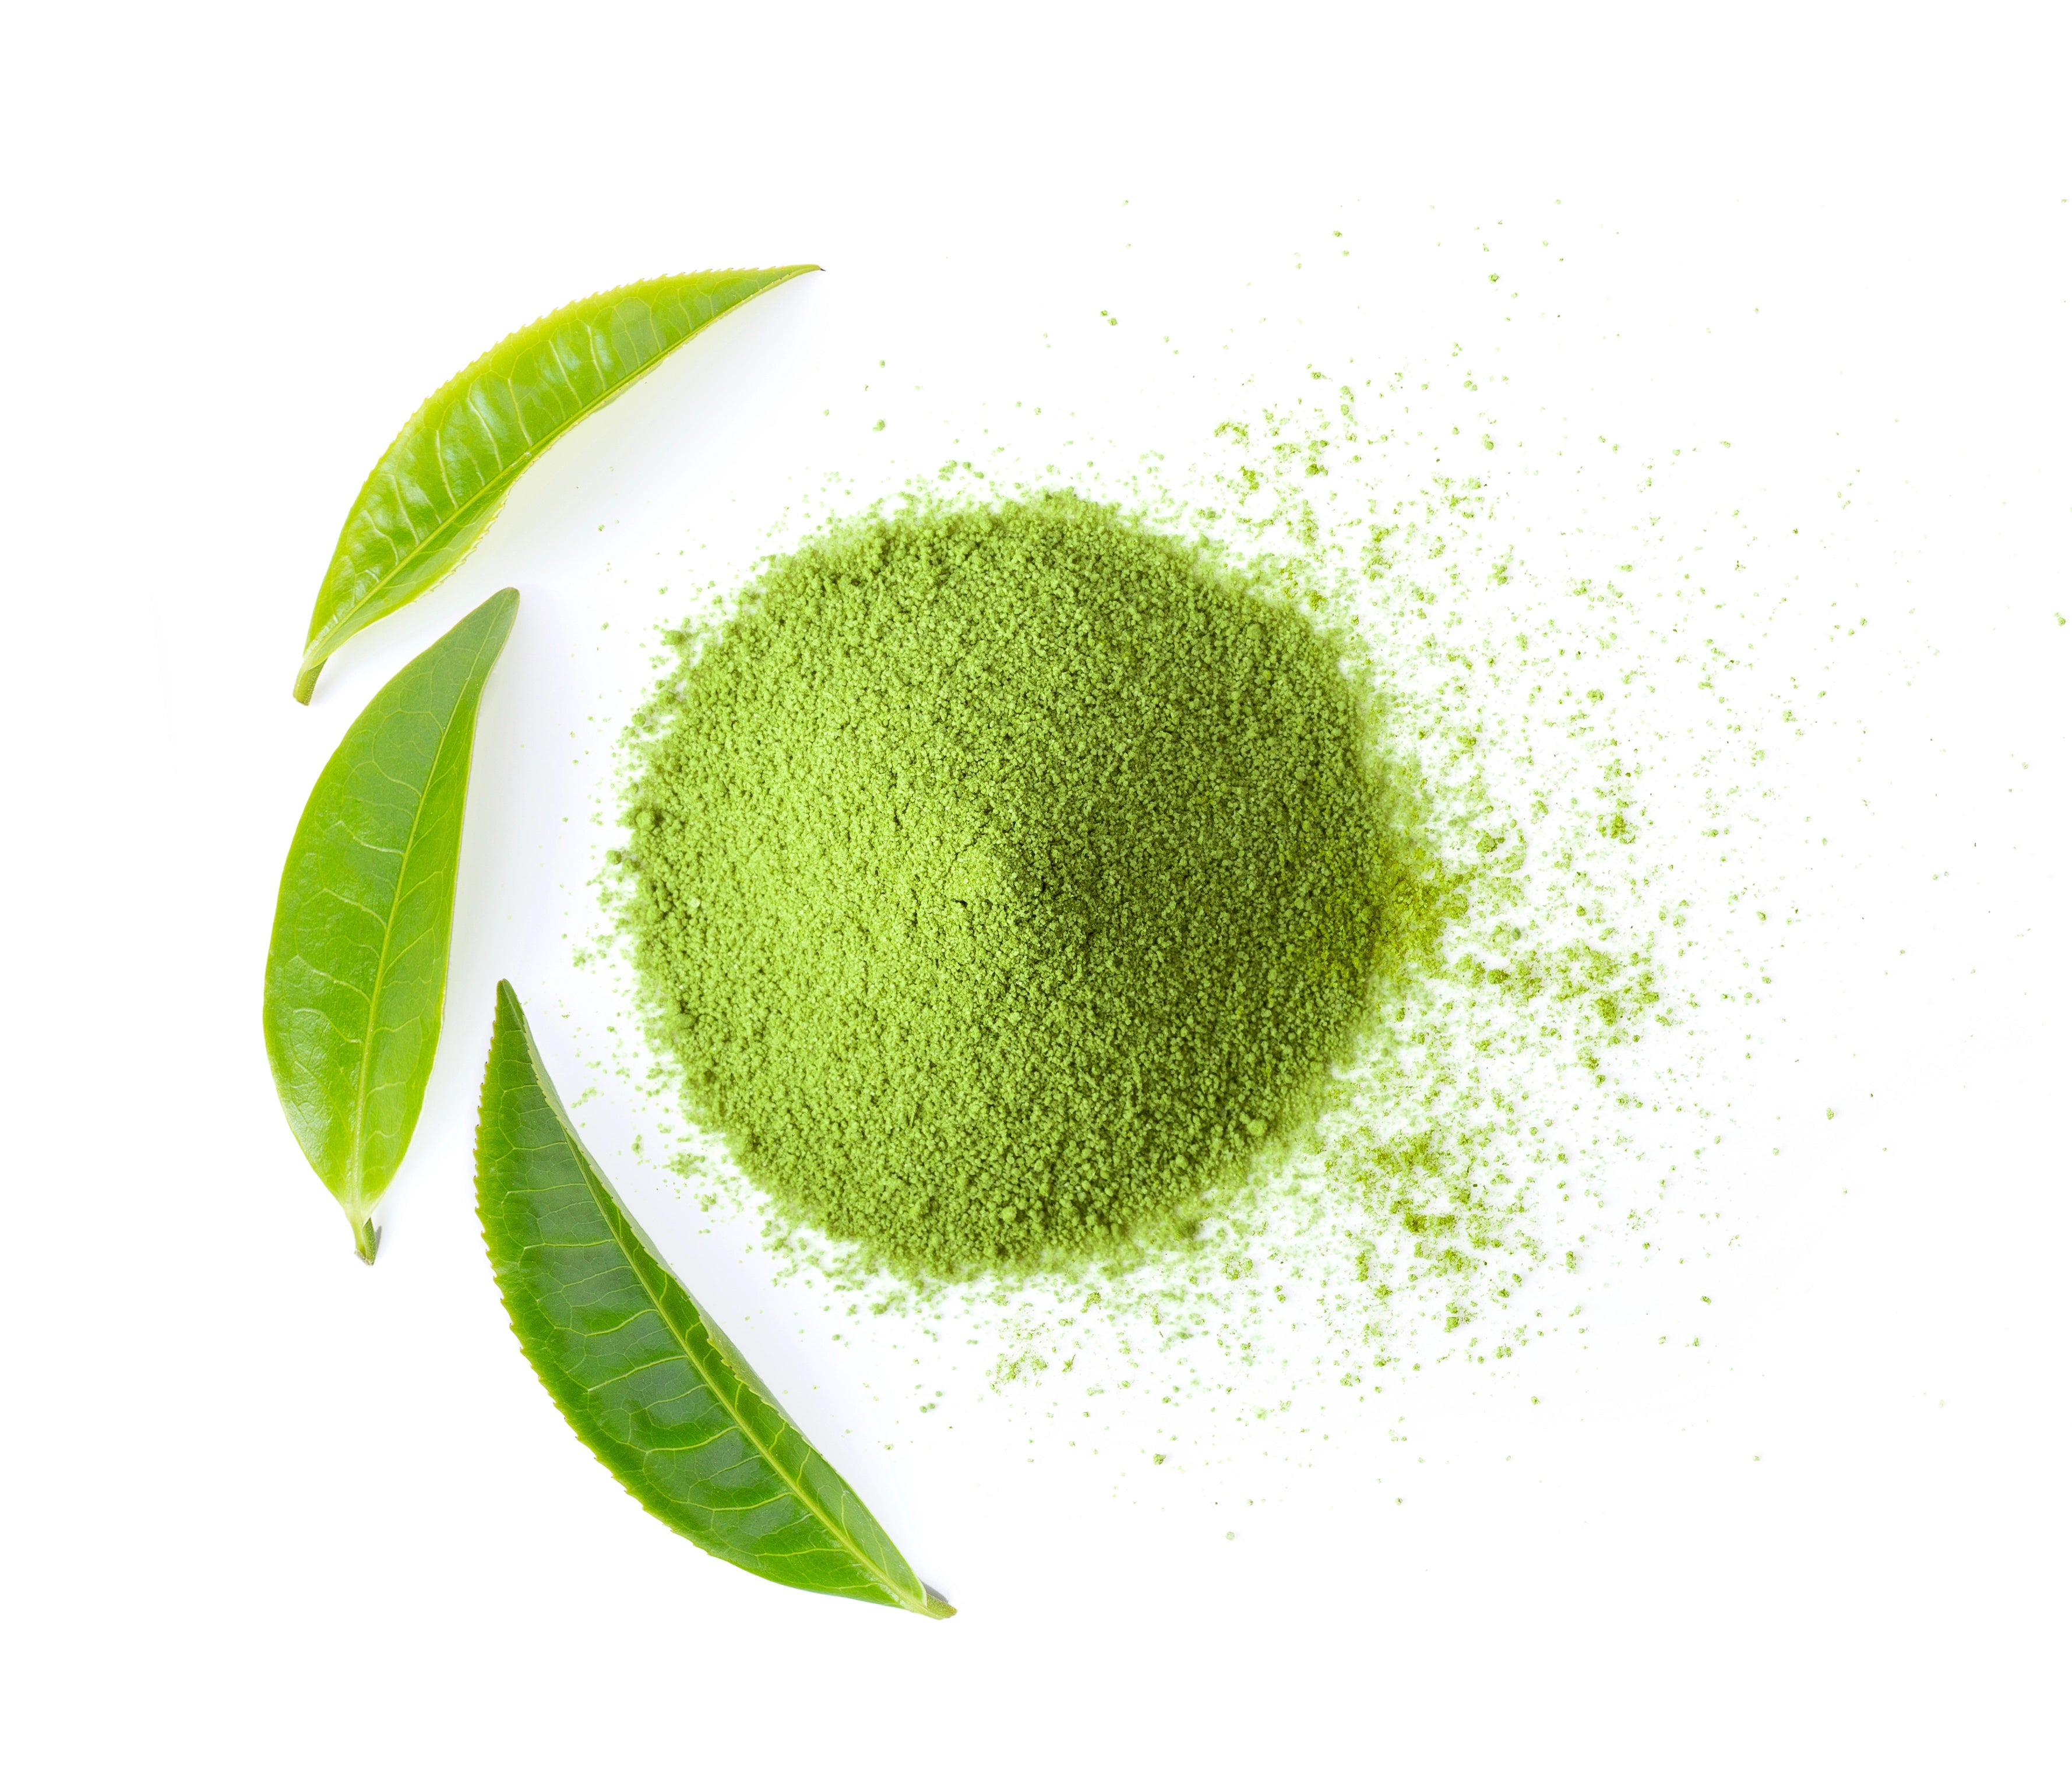 matcha-green-tea-powder-with-leaves-white-wall